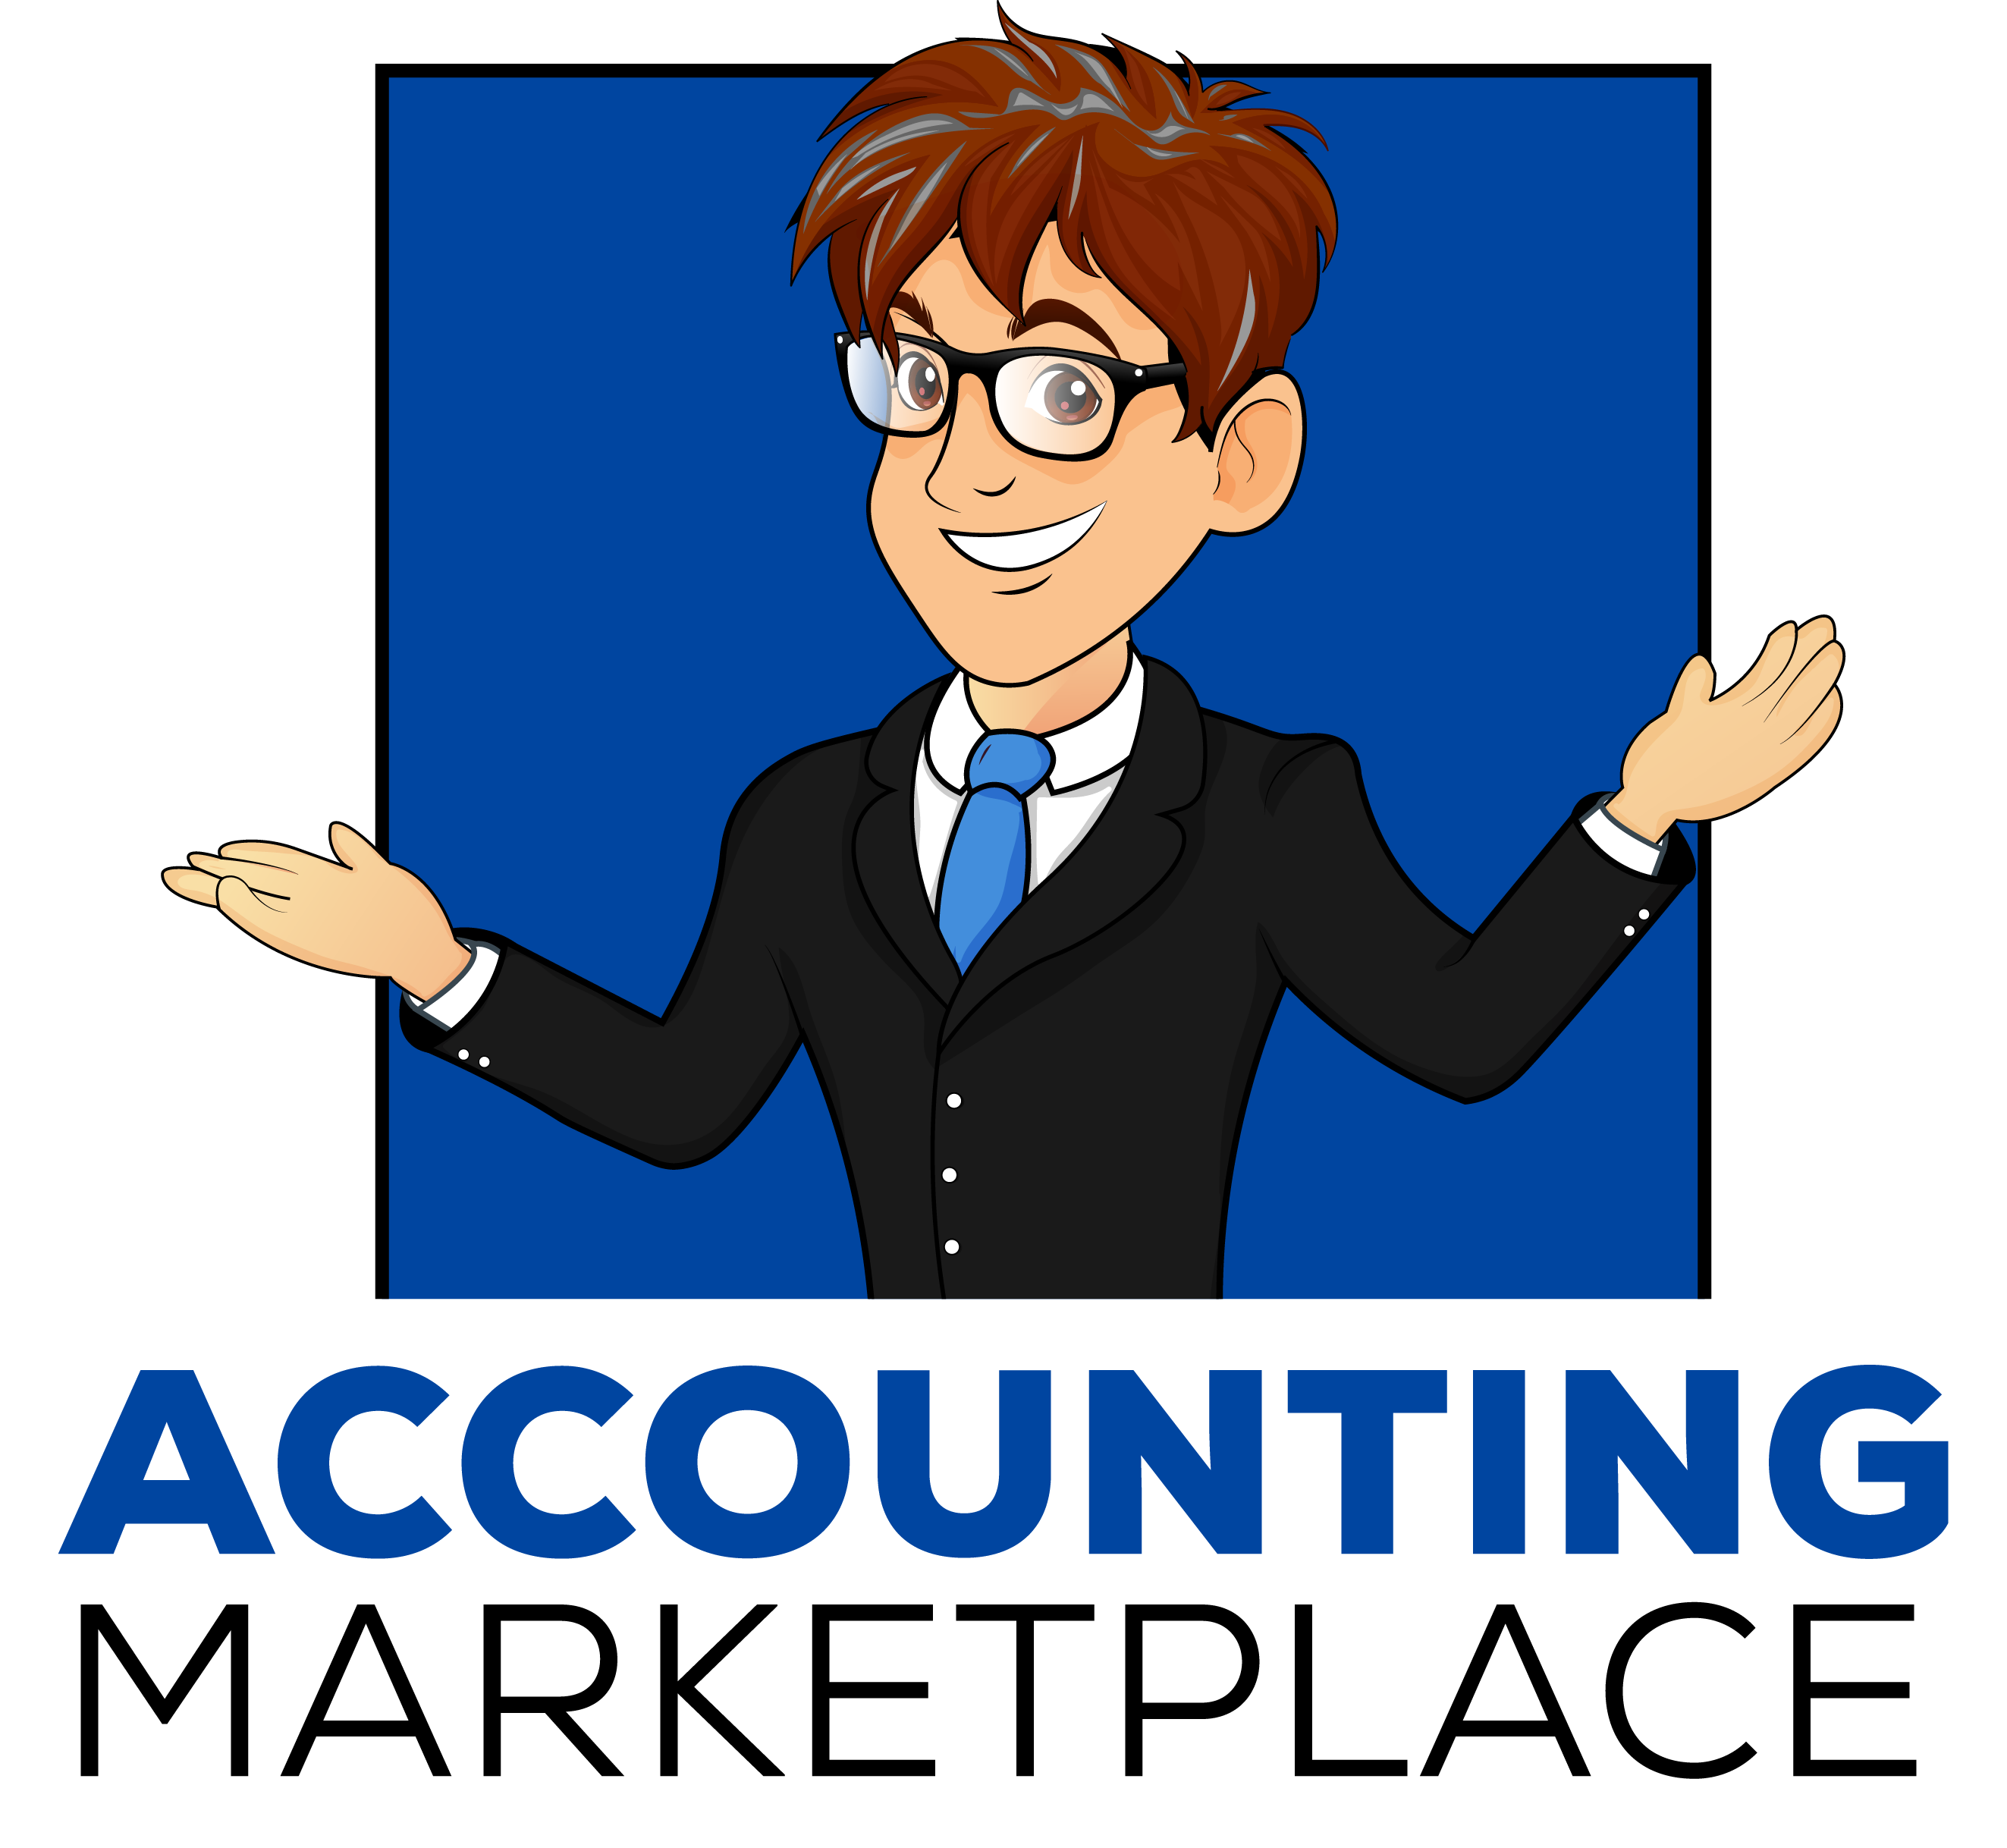 Accounting Services in Abu Dhabi